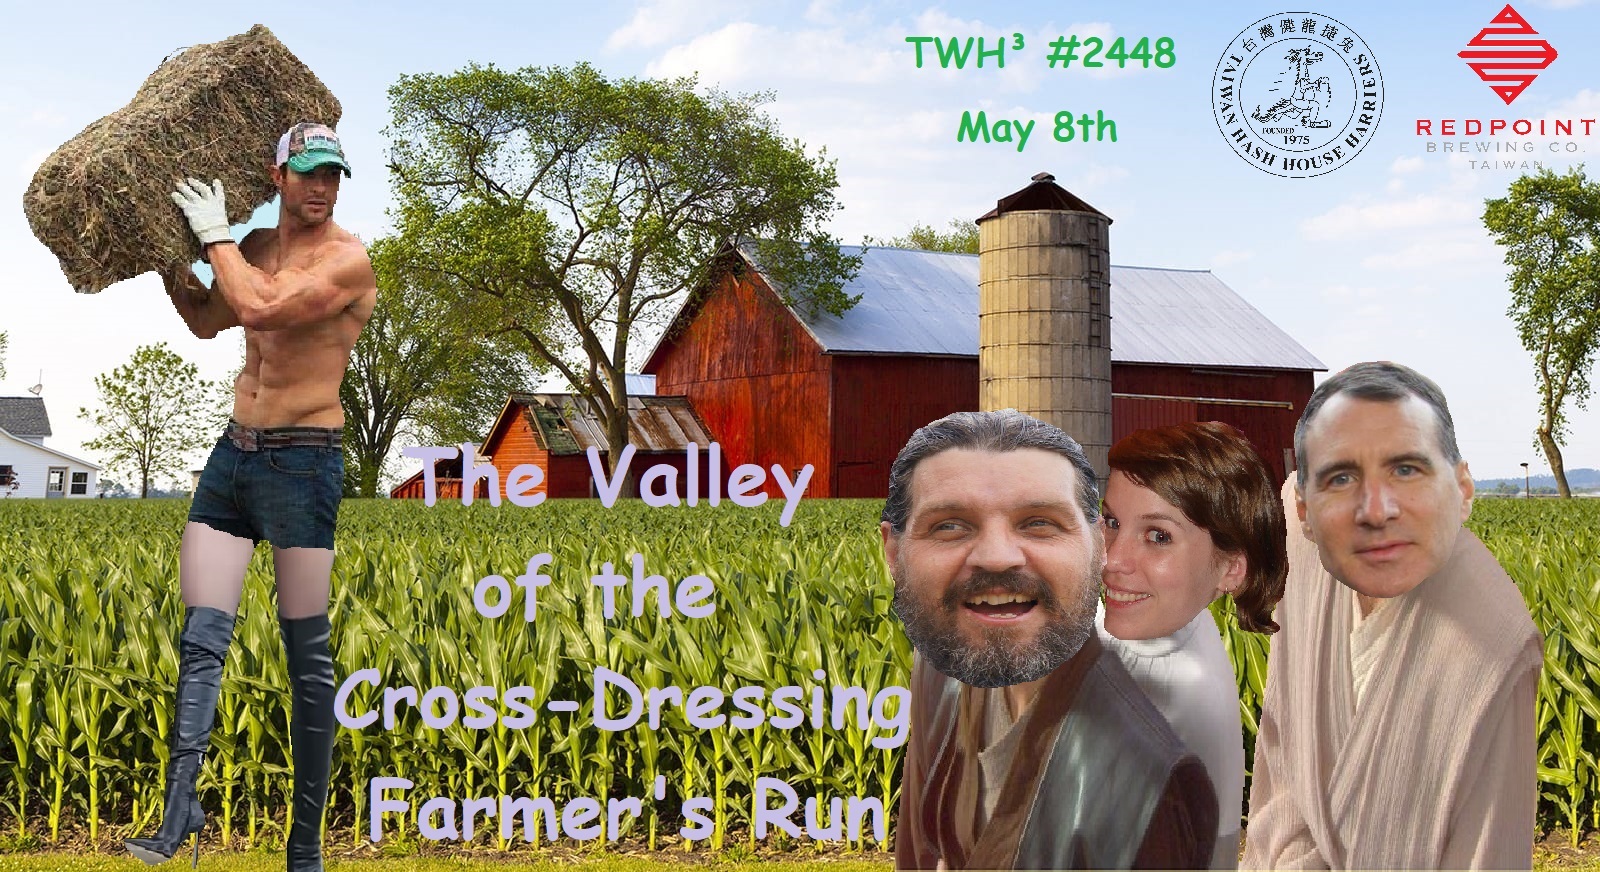 #2448 - The Valley of the Cross-Dressing Farmers Run